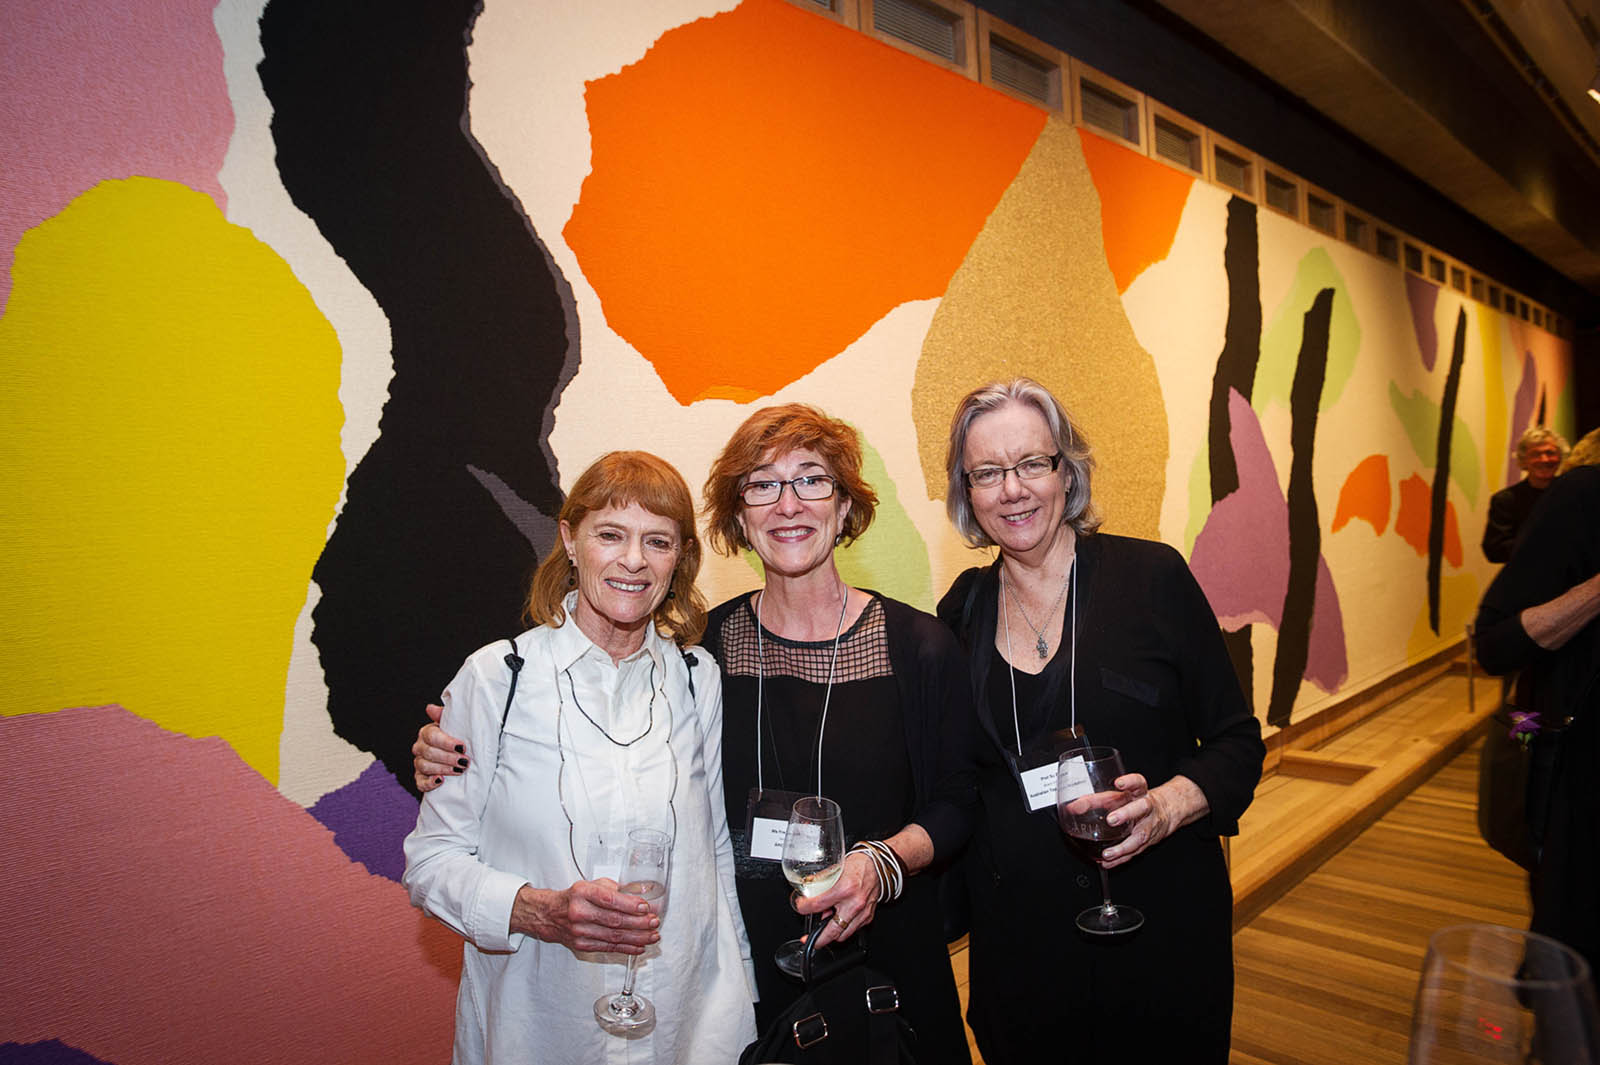 Left to right: Janet Laurence, Fran Clark and Pro Vice Chancellor Su Baker AM at the Utzon Room, Sydney Opera House. Photo: Petri Kurkaa